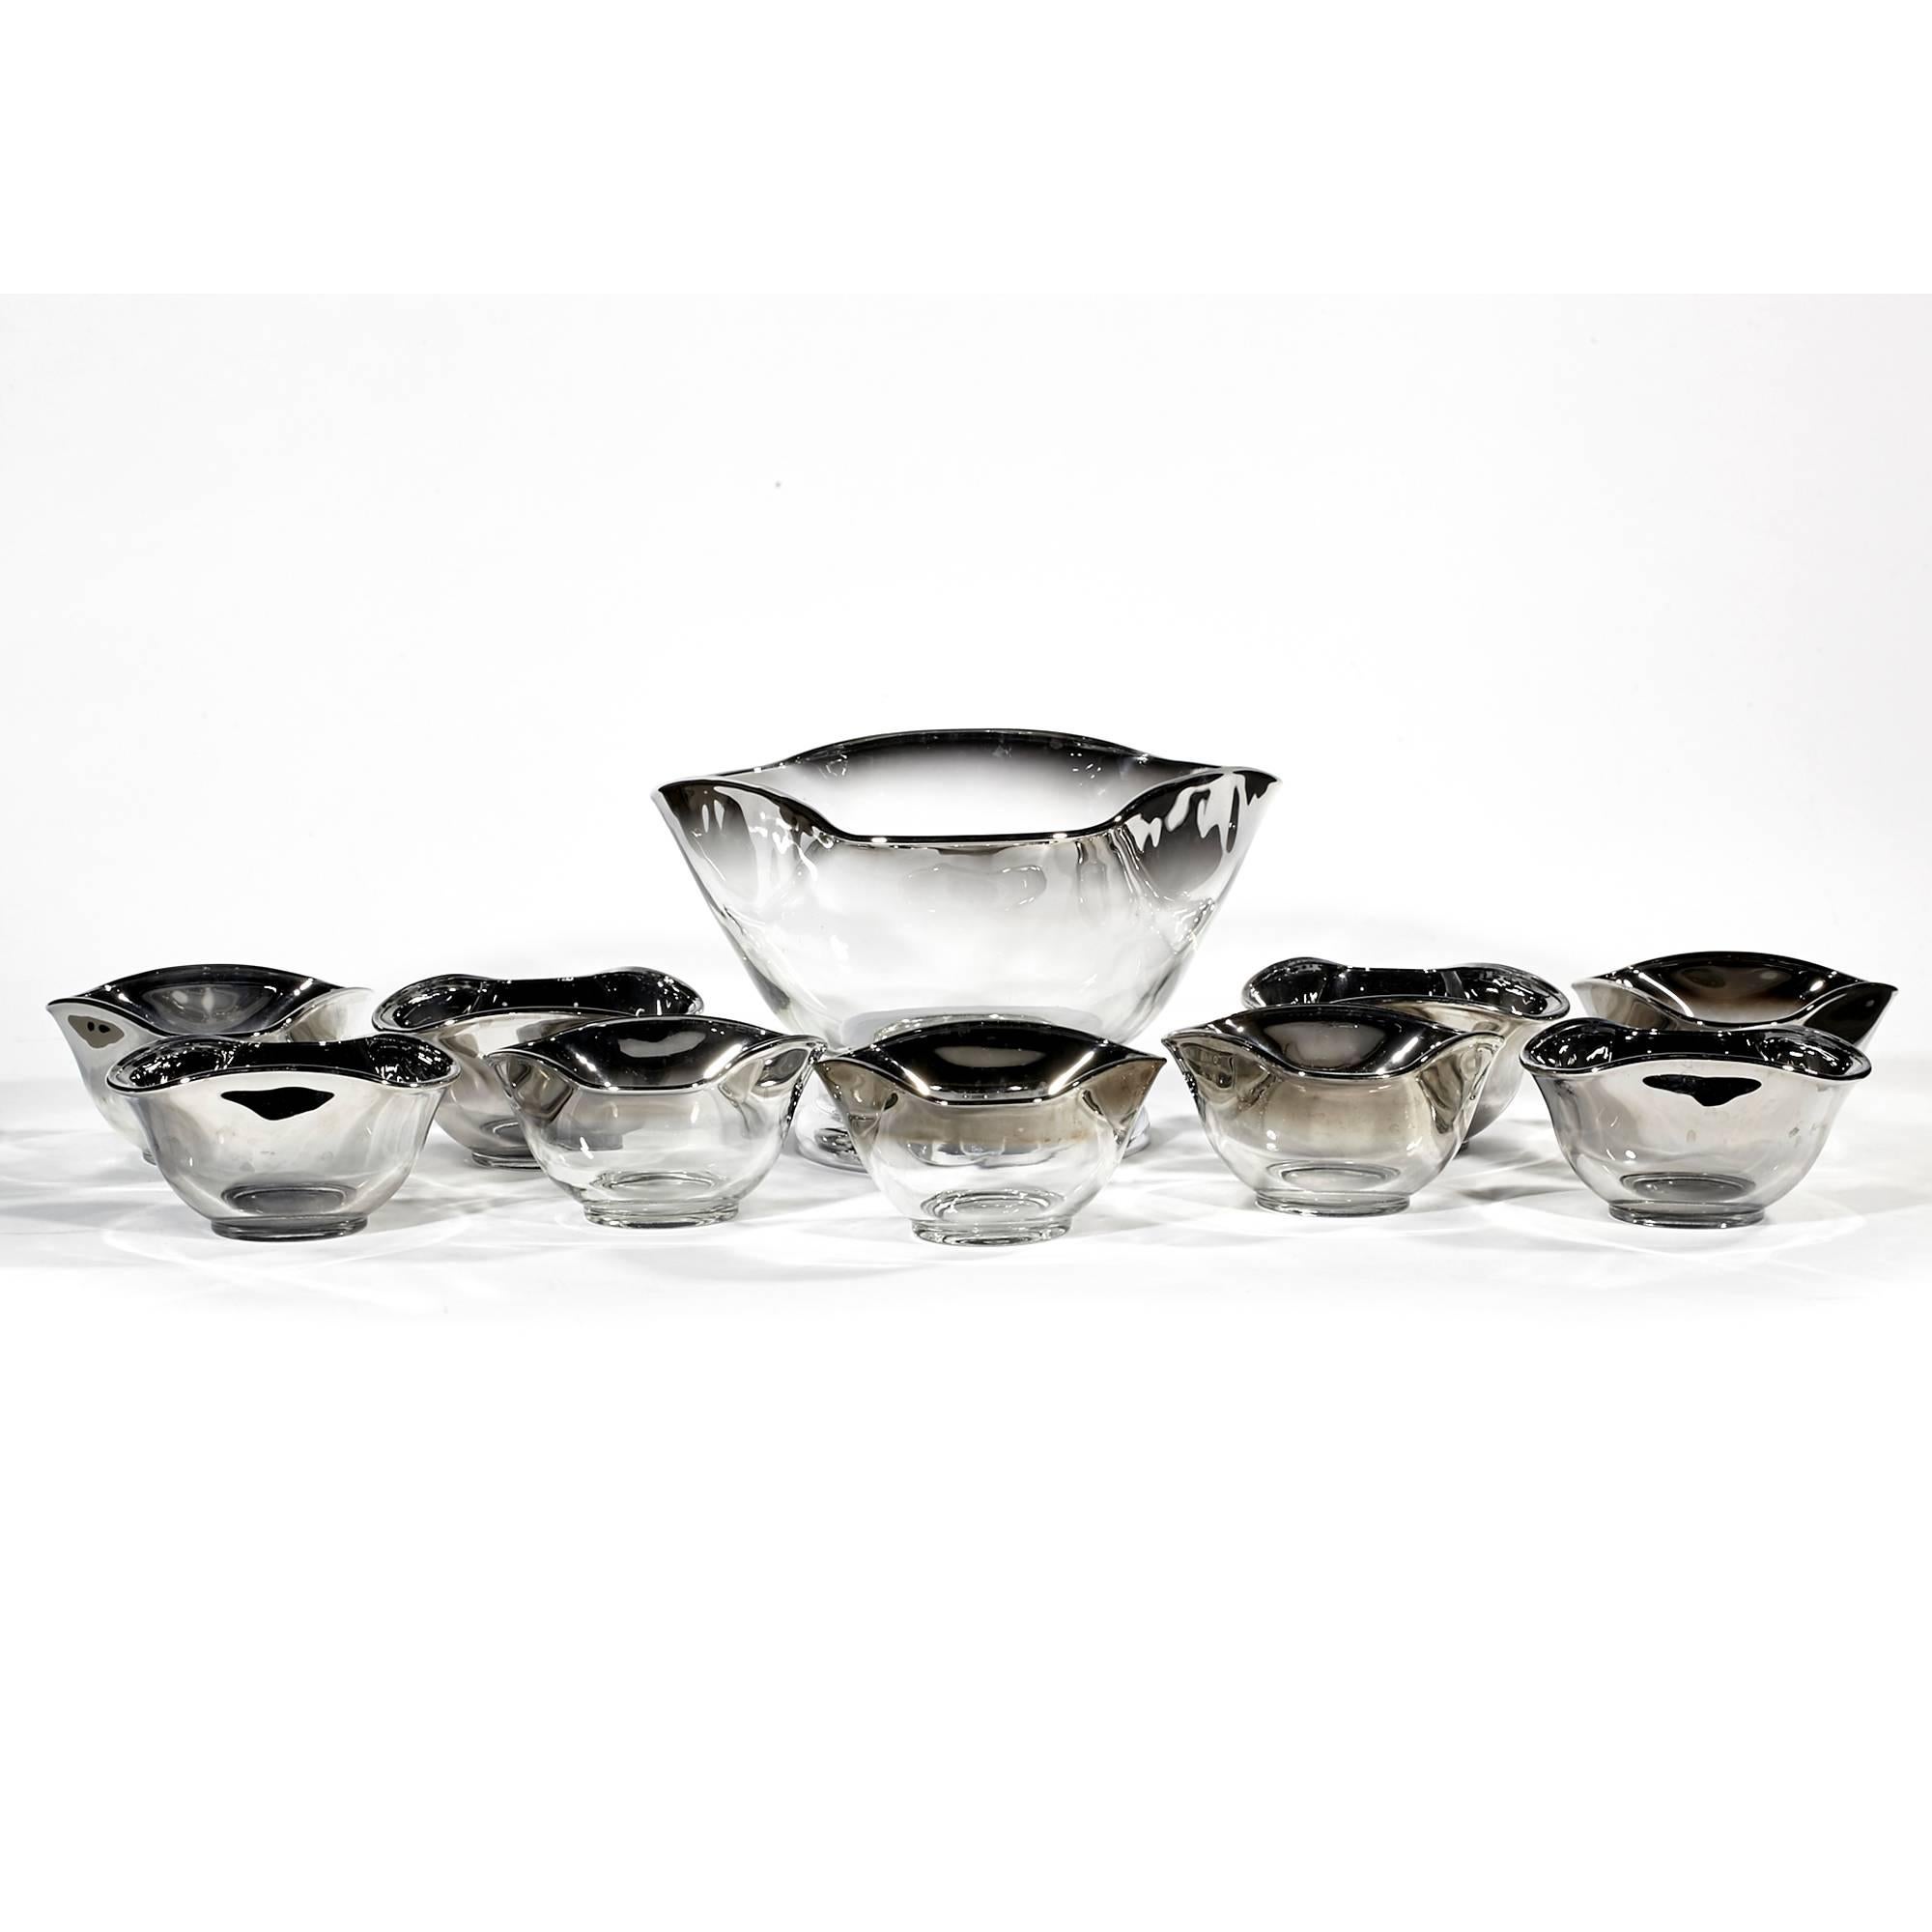 Vintage mid-20th century modern silver fade glass serving bowl set, circa 1960s. The set includes a large chrome base serving bowl and 9 individual bowls. Individual bowls are 5in.D x 3in.H.